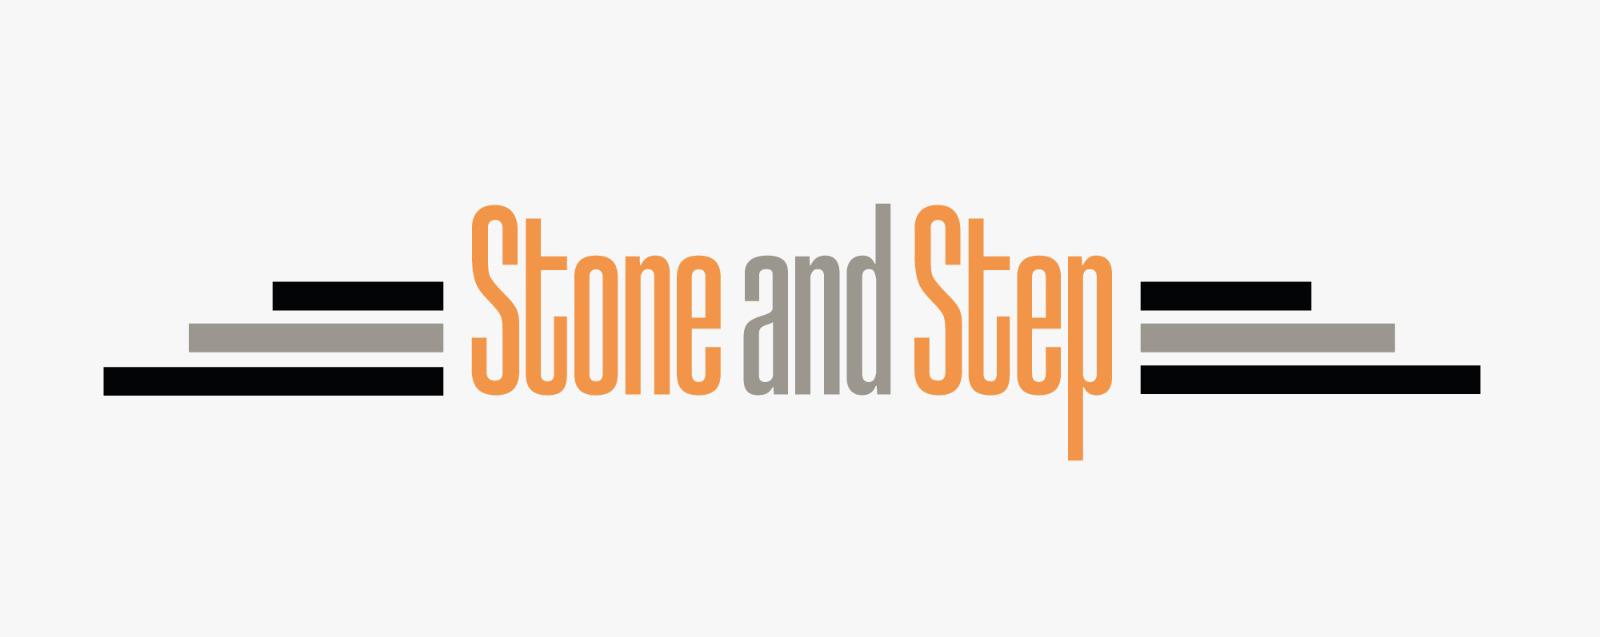 Stone and Step